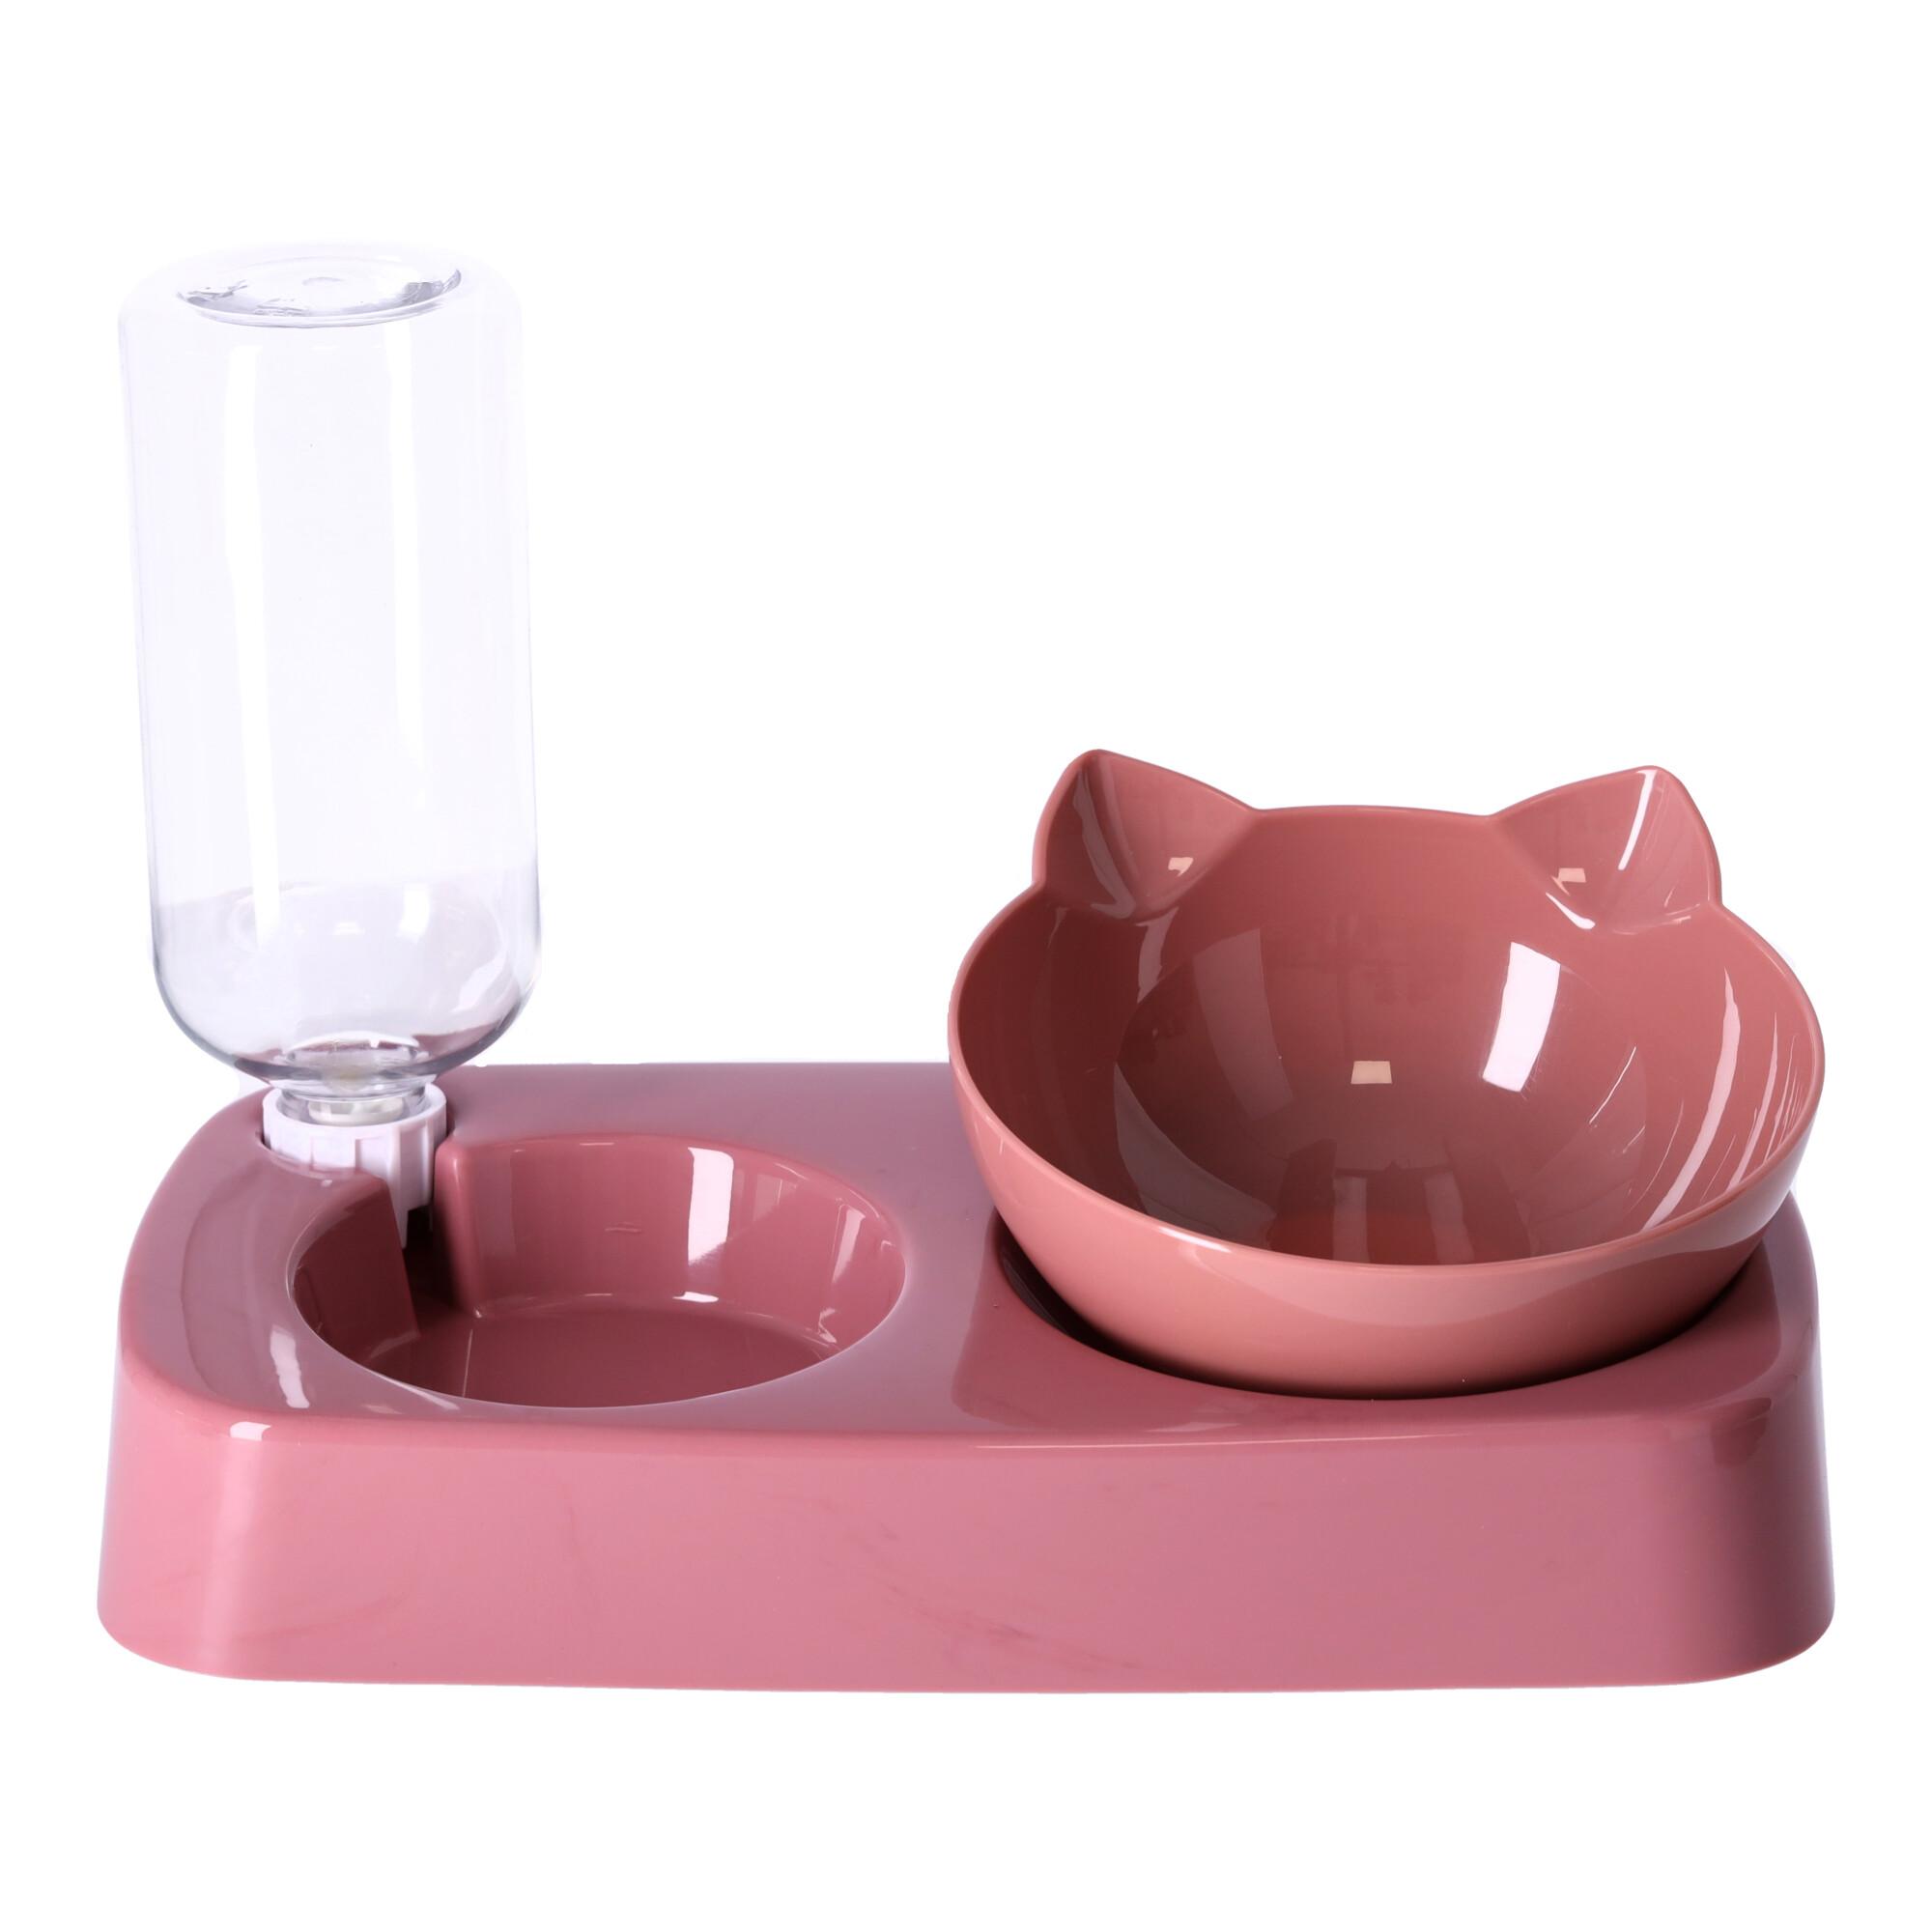 Bowl with automatic water dispenser for dog and cat 2-in-1 - pink